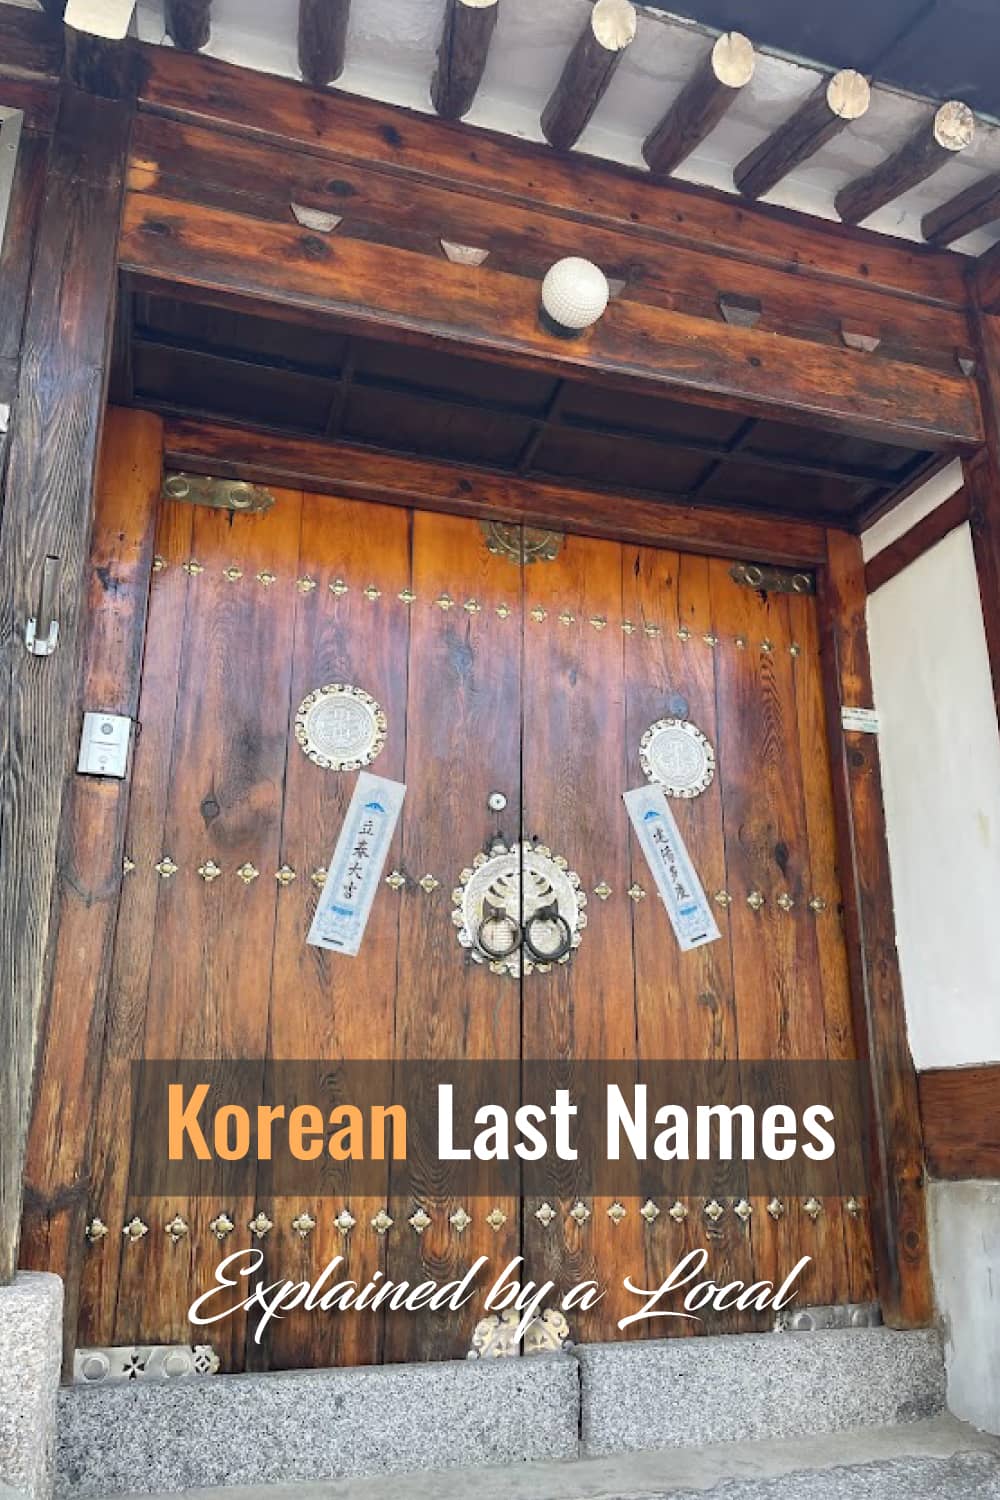 Korean Last Names Explained by a Local